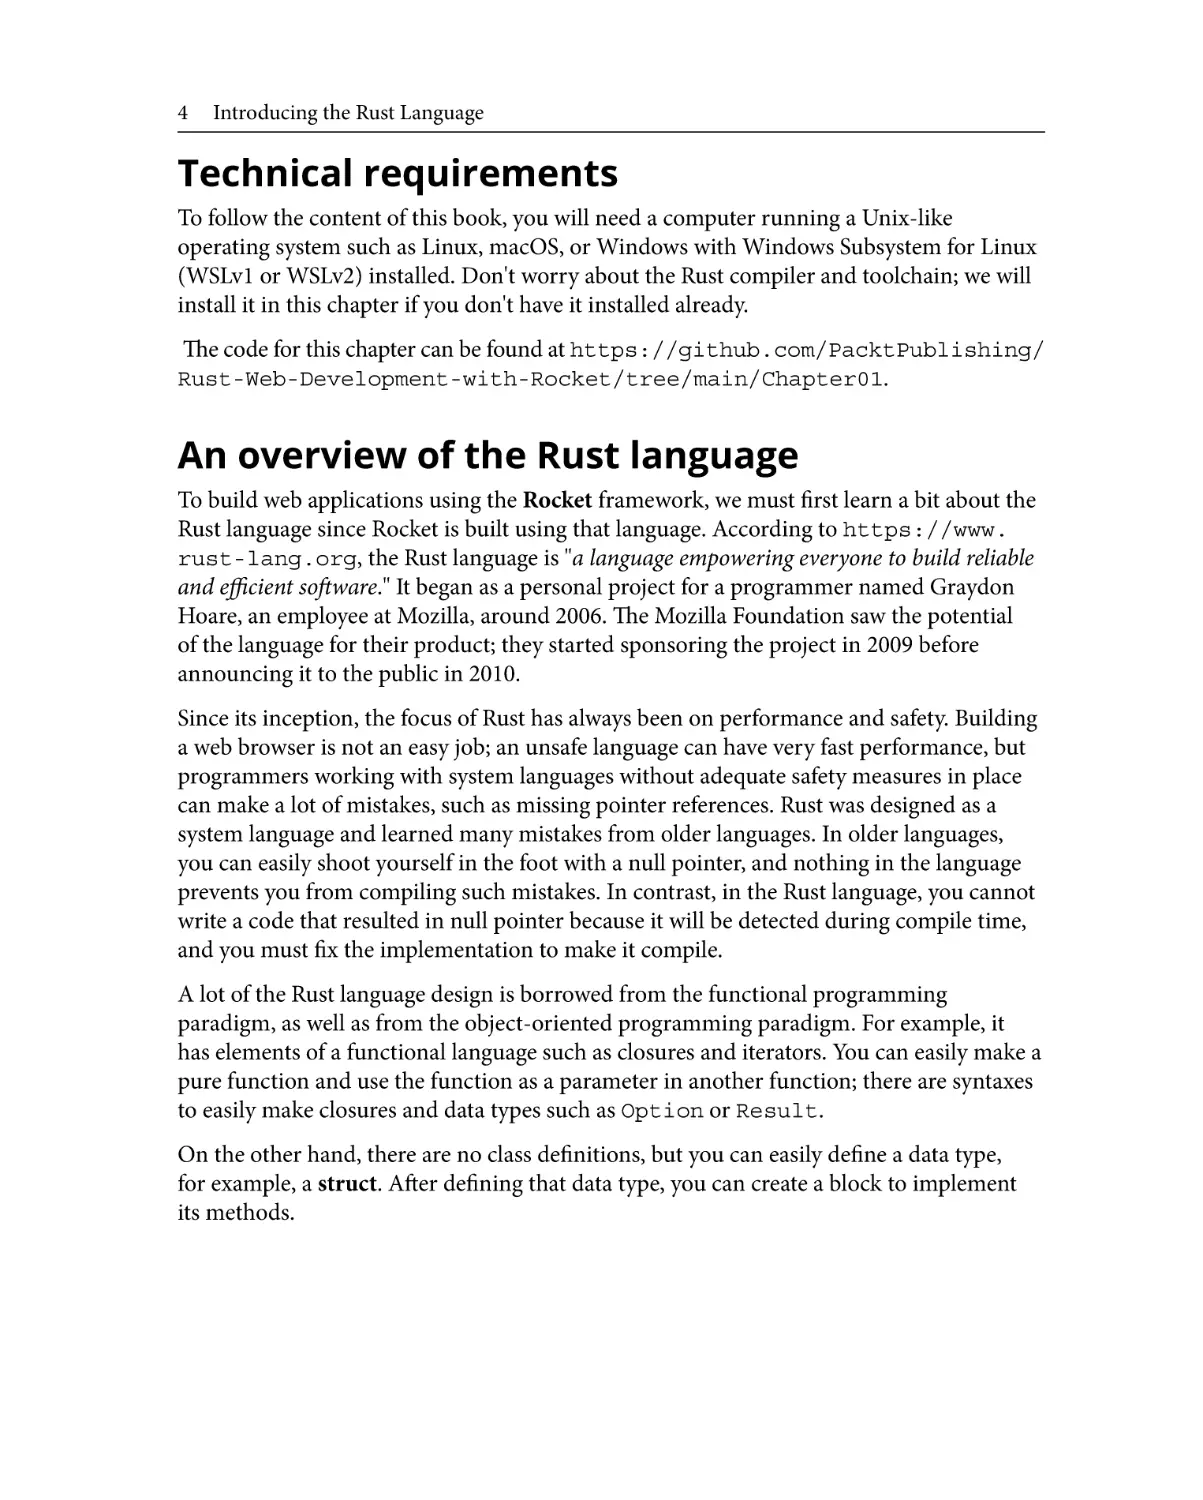 Technical requirements
An overview of the Rust language